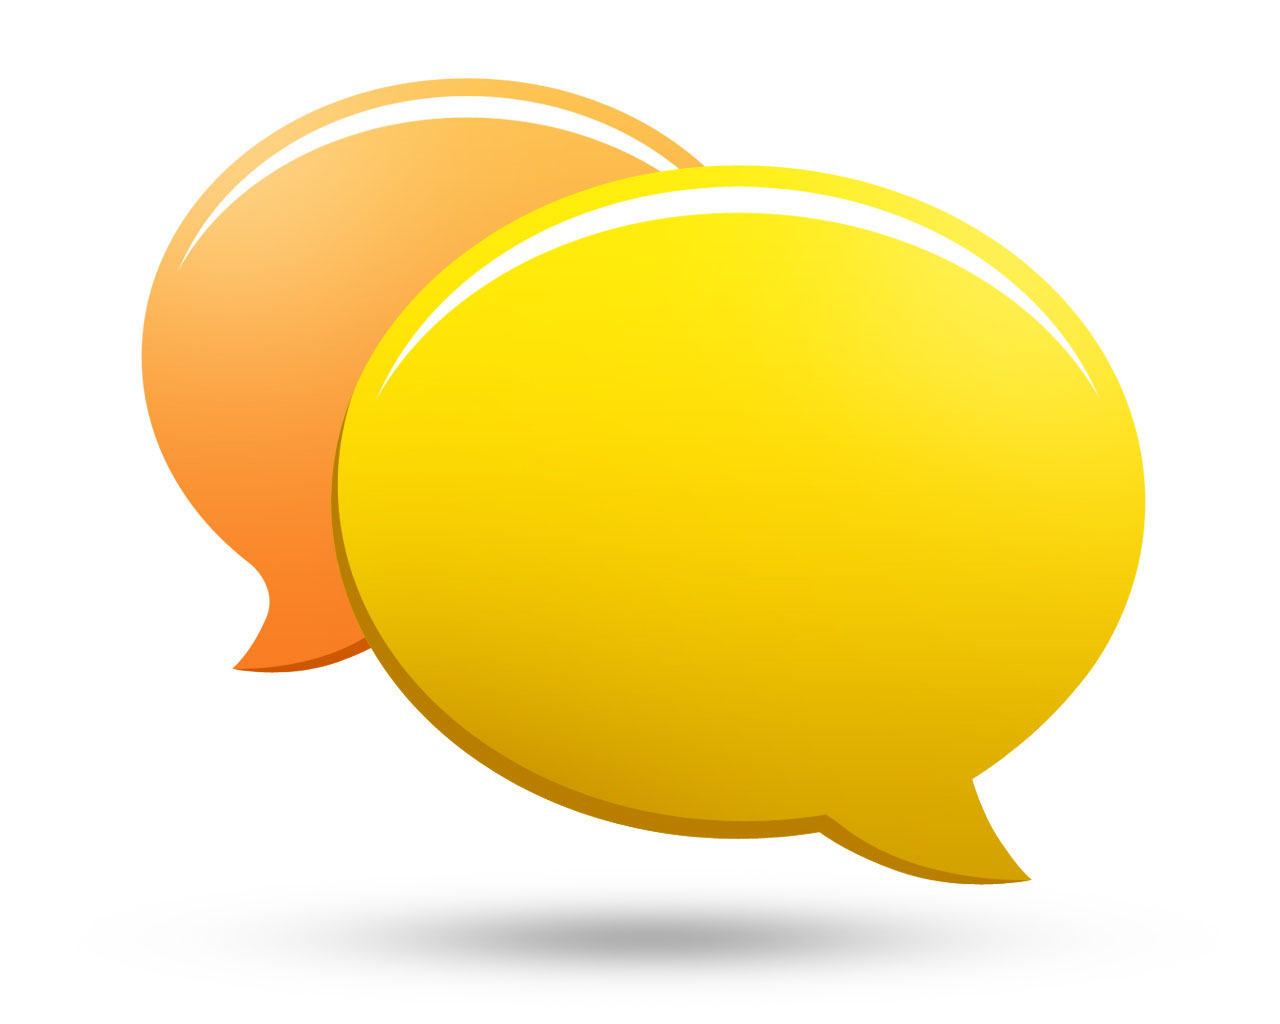 Live Chat - To Chat or Not To Chat